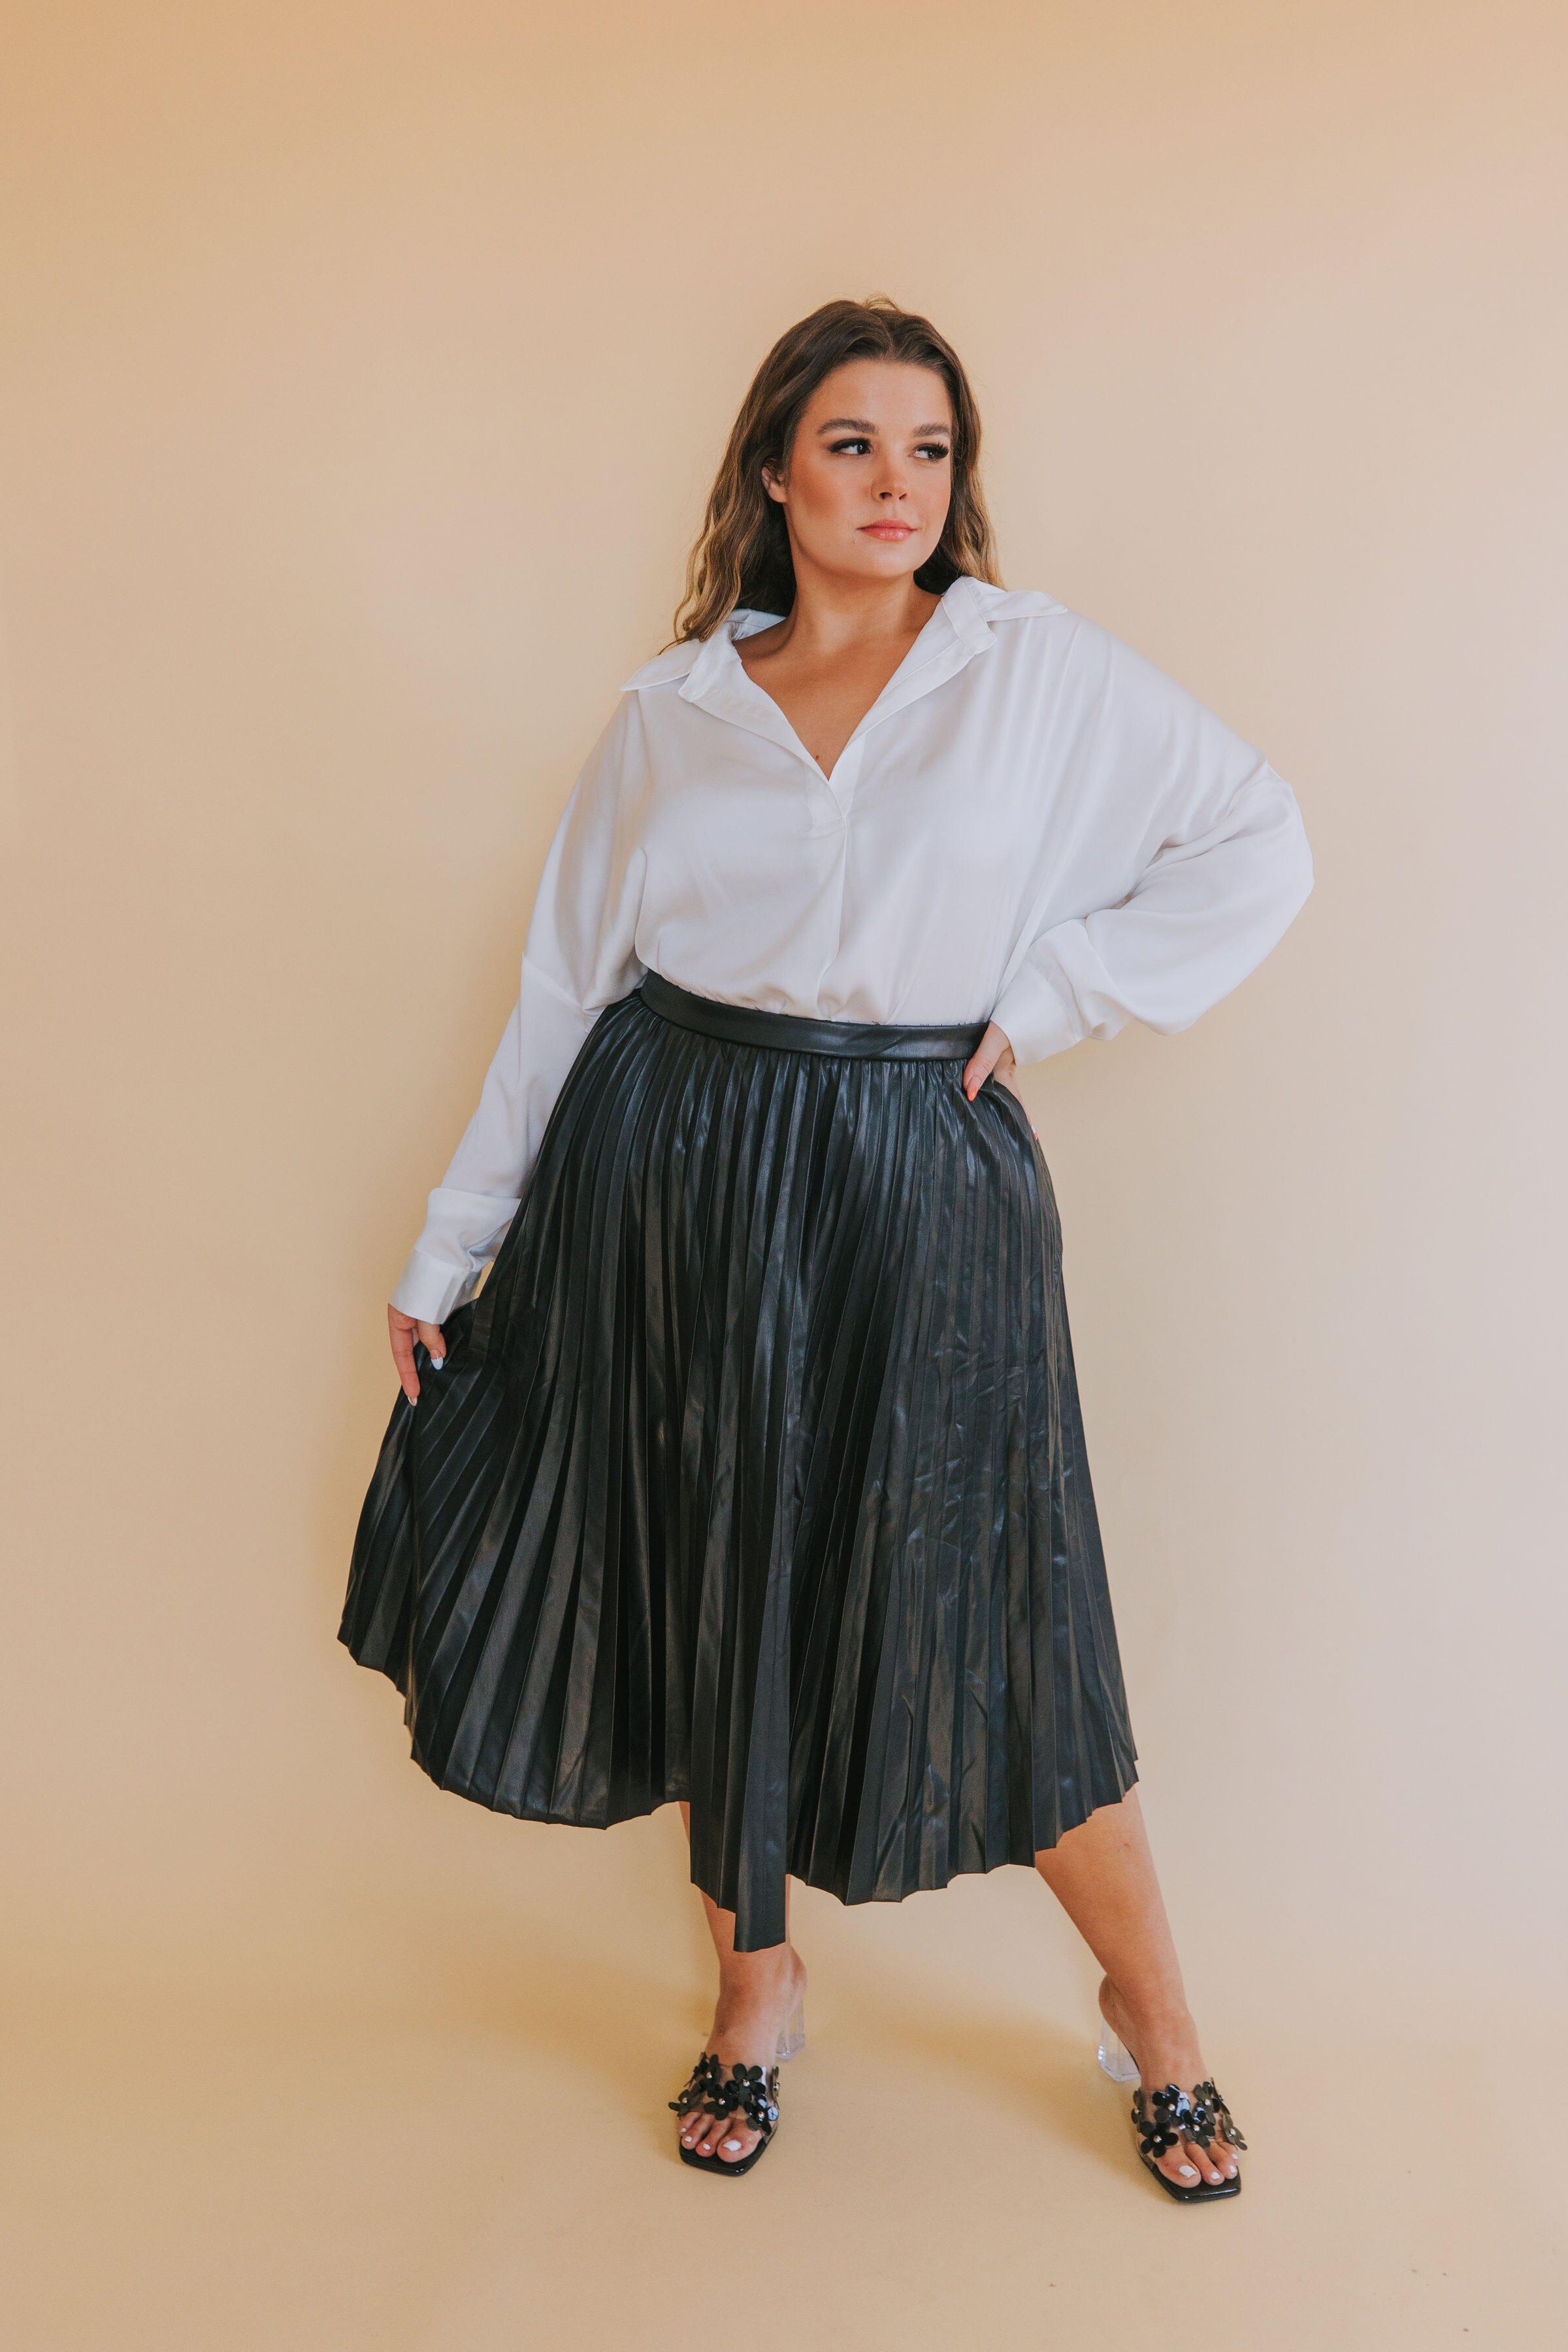 PLUS SIZE - Keep Coming Back Skirt - 2 Colors!